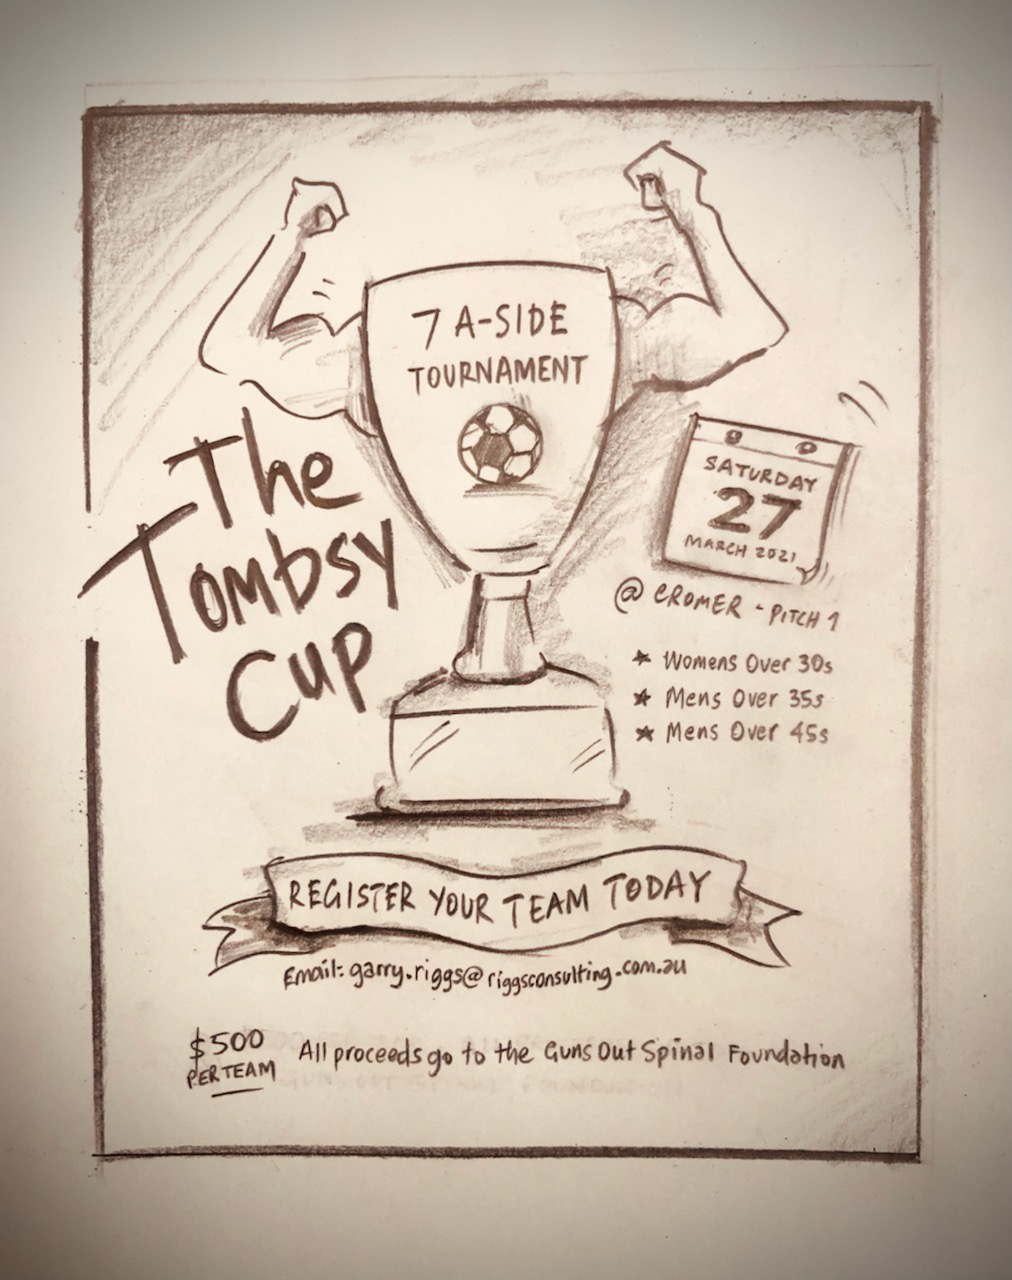 Tombsy Cup